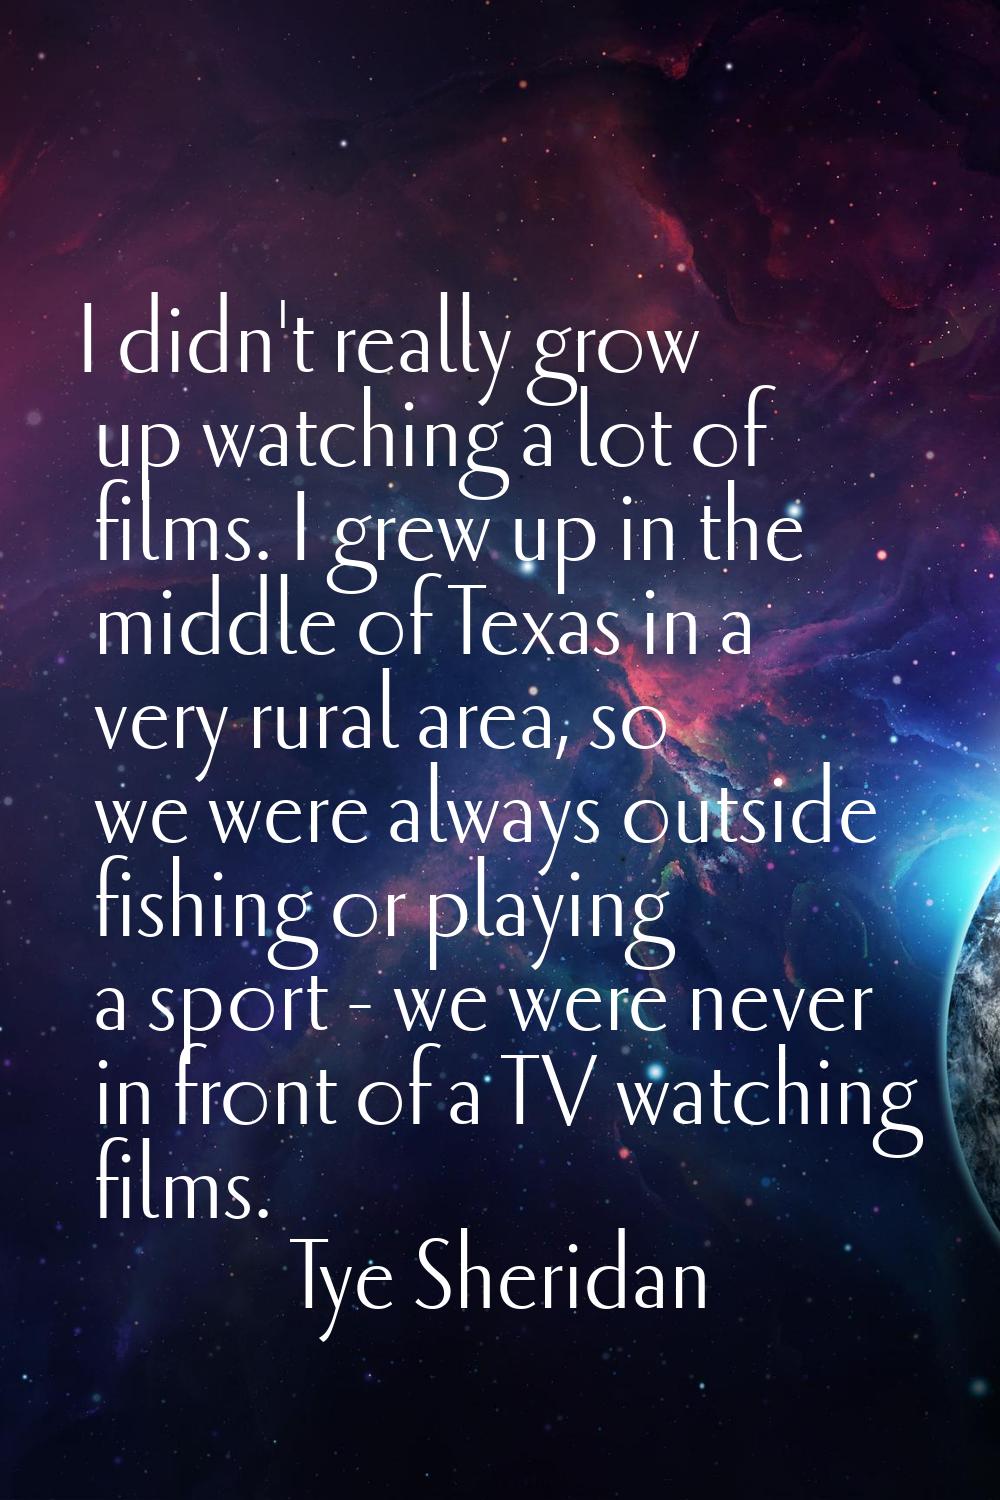 I didn't really grow up watching a lot of films. I grew up in the middle of Texas in a very rural a